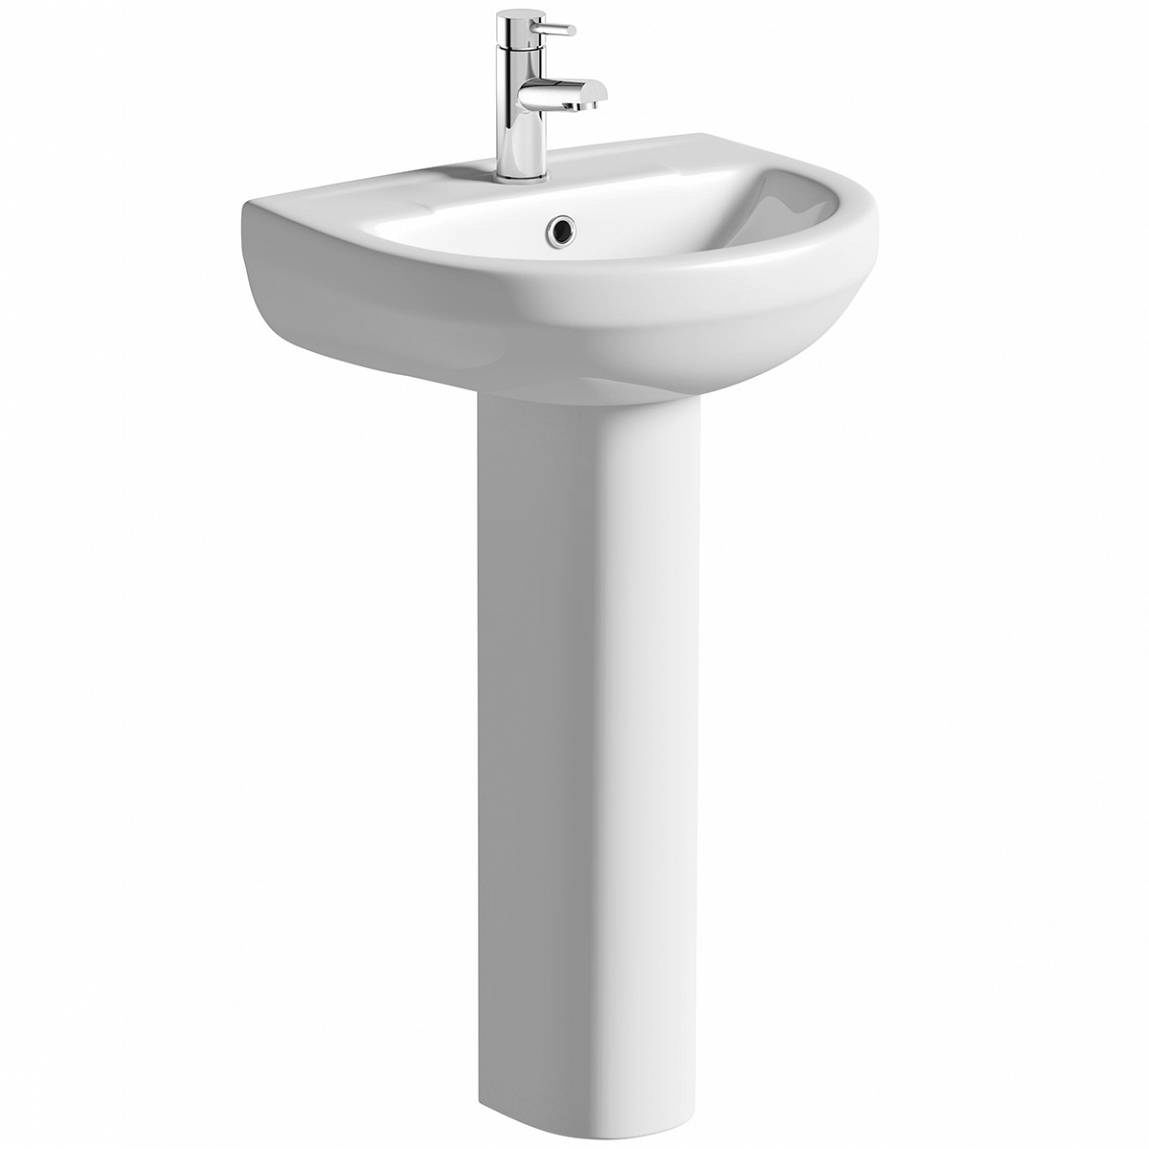 Orchard Eden 1 tap hole full pedestal basin 550mm with tap